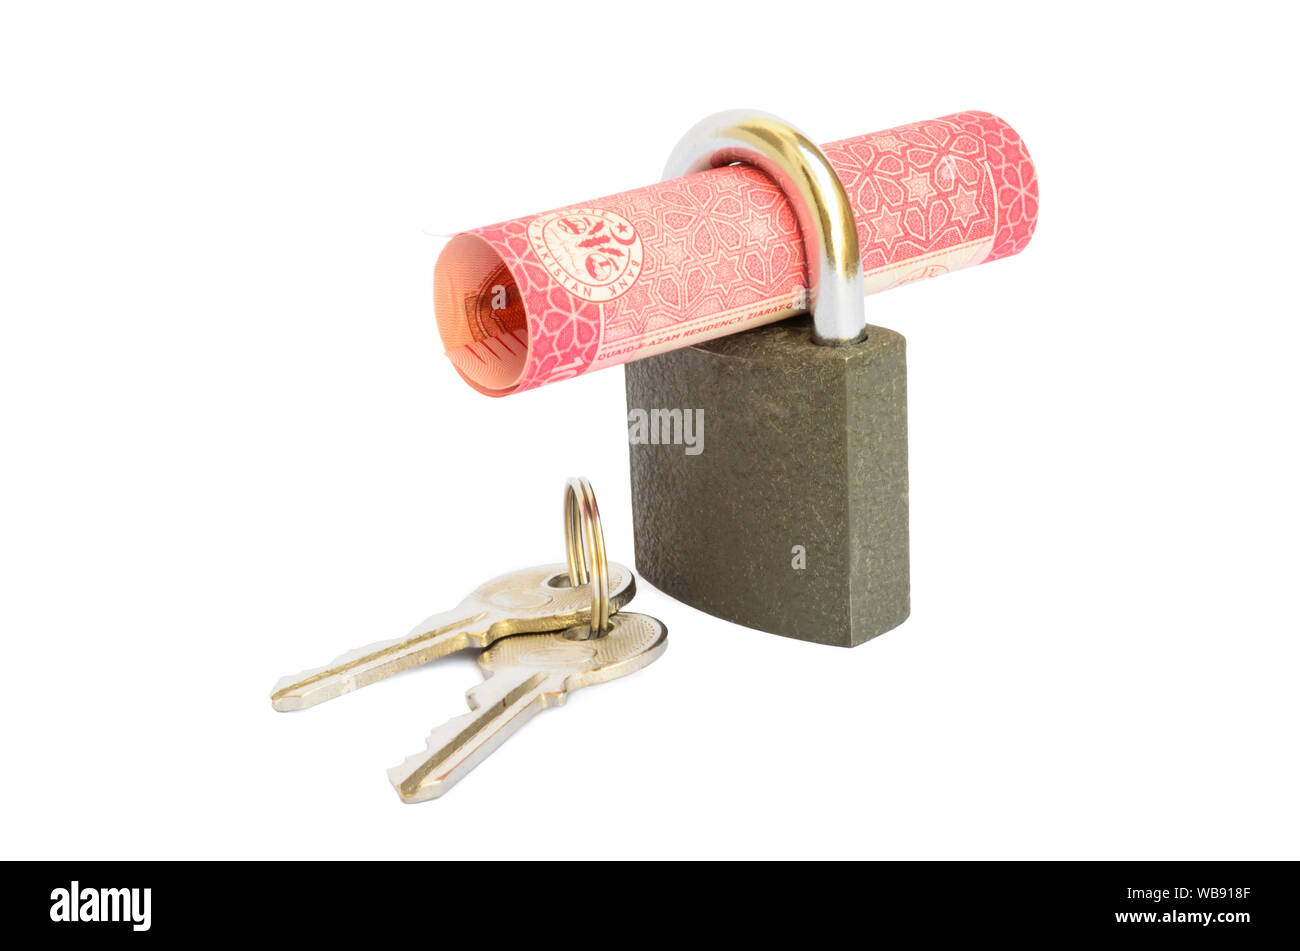 Hundred rupee Pakistani currency note rolled in a padlock Stock Photo